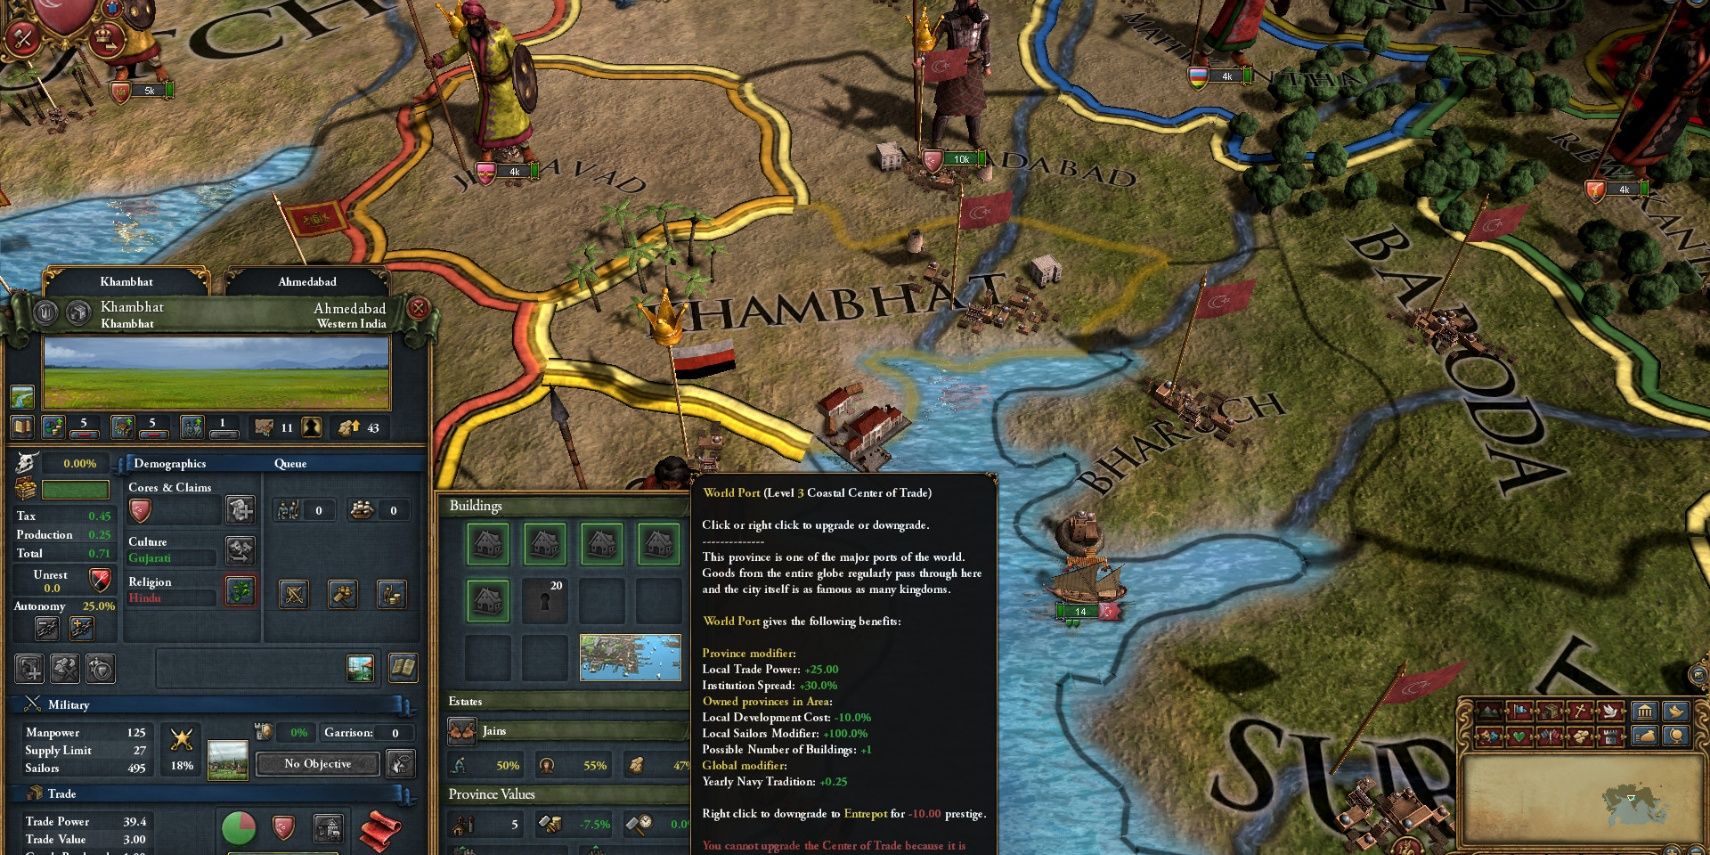 The in-game map of Europa Universalis 4